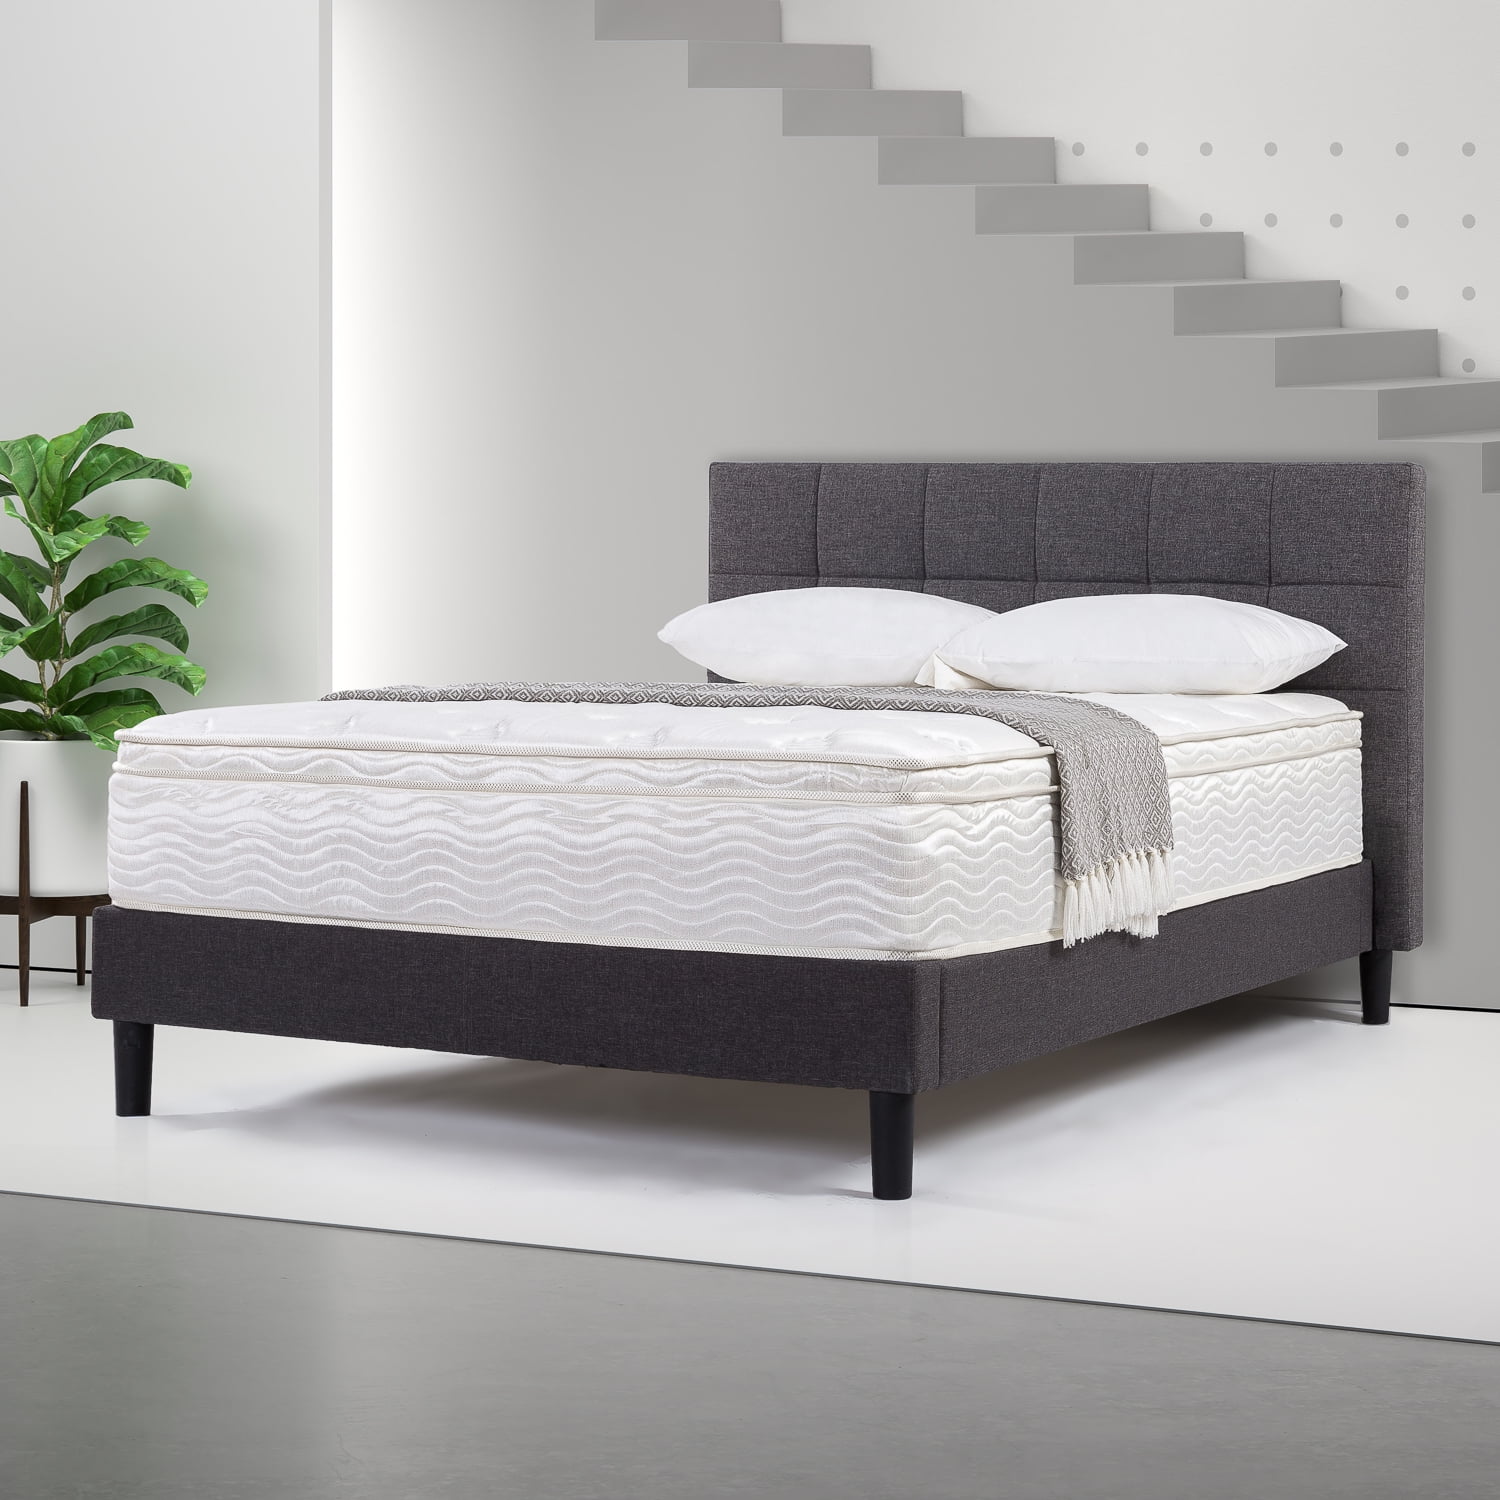 Slumber 1 By Zinus Quilted Top 8, Twin Box Springs For King Size Bed